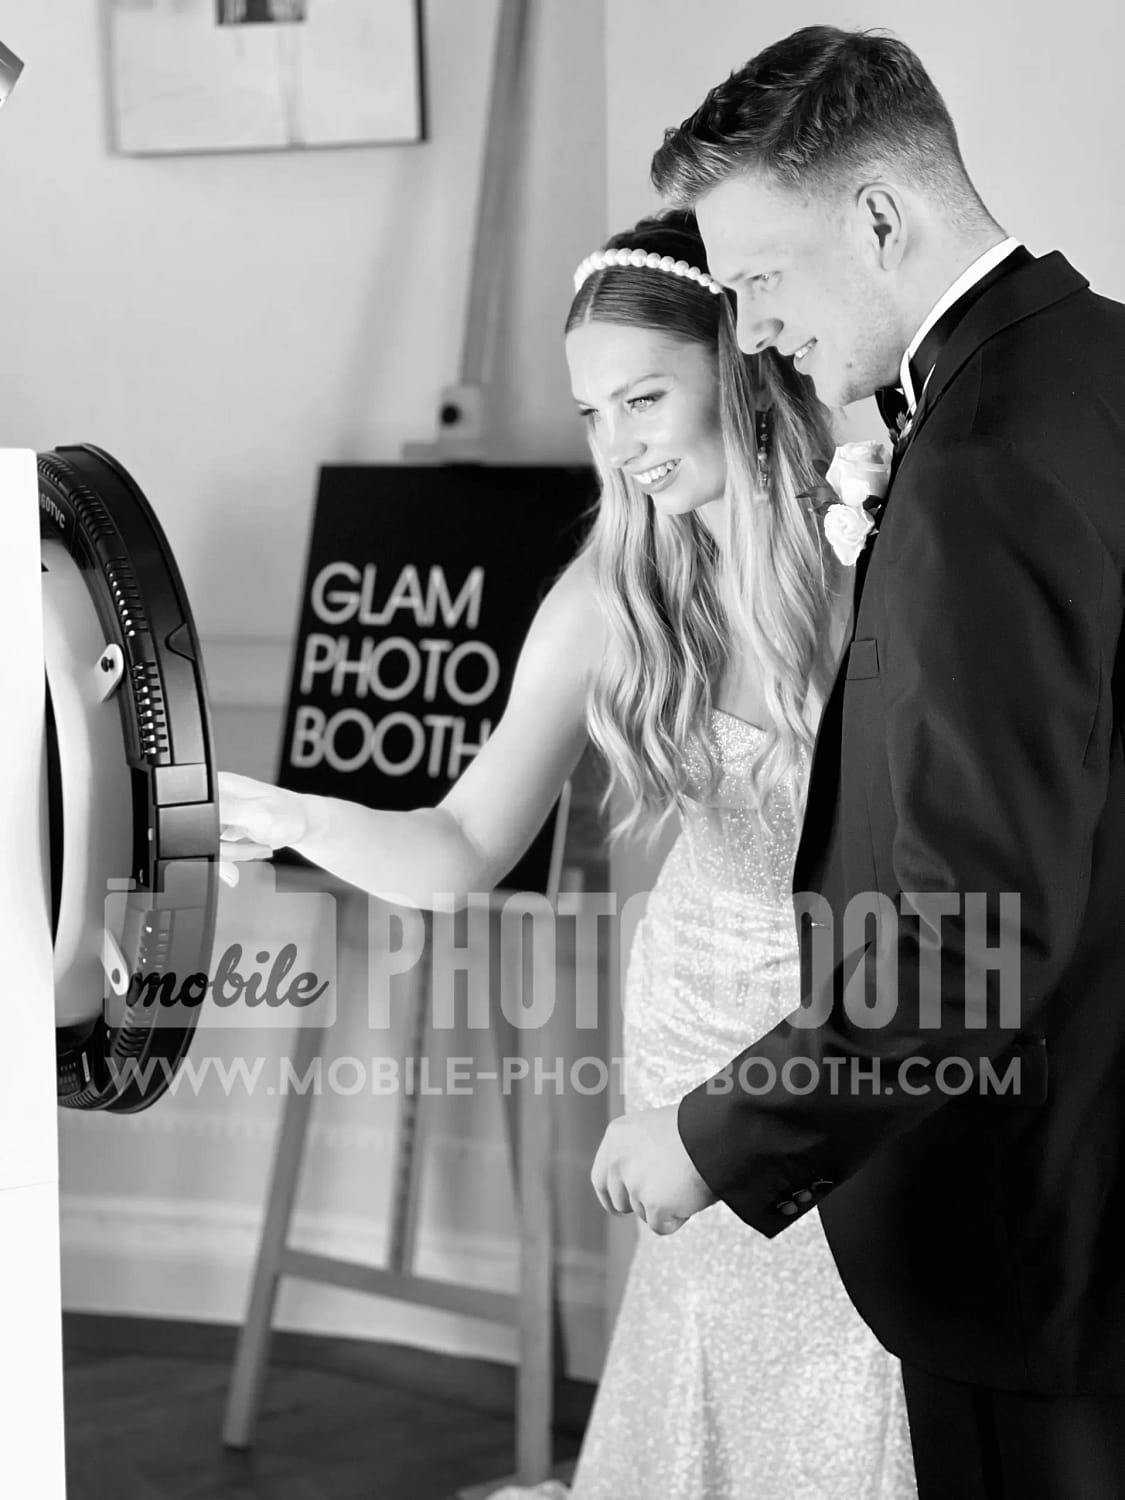 Black and white photo booth hire in Somerset, England